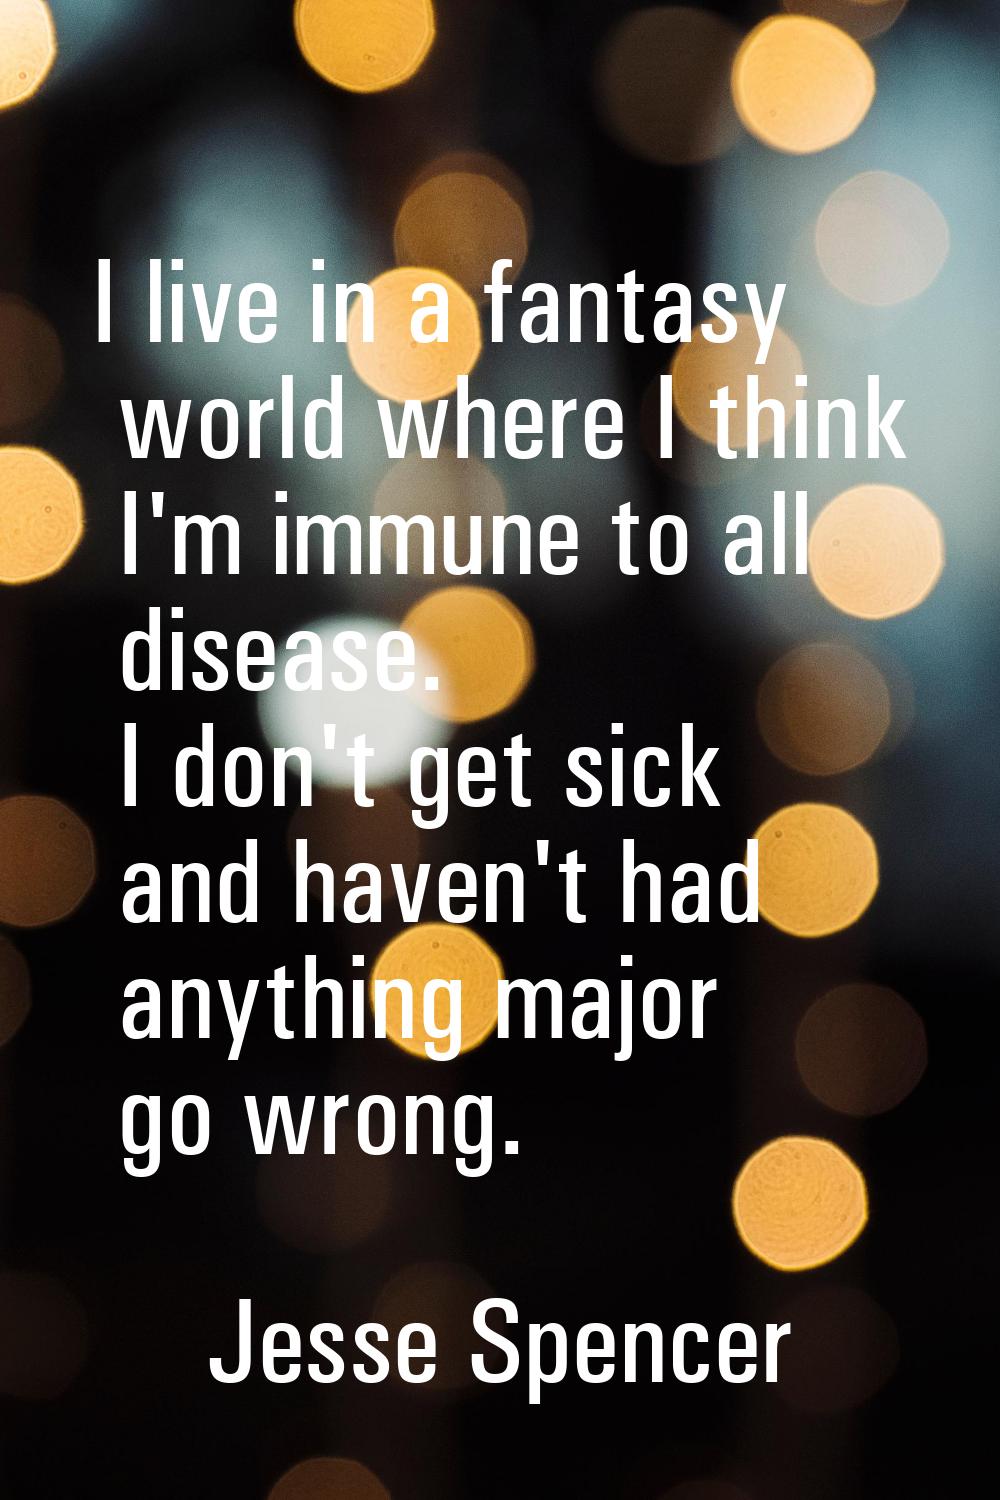 I live in a fantasy world where I think I'm immune to all disease. I don't get sick and haven't had